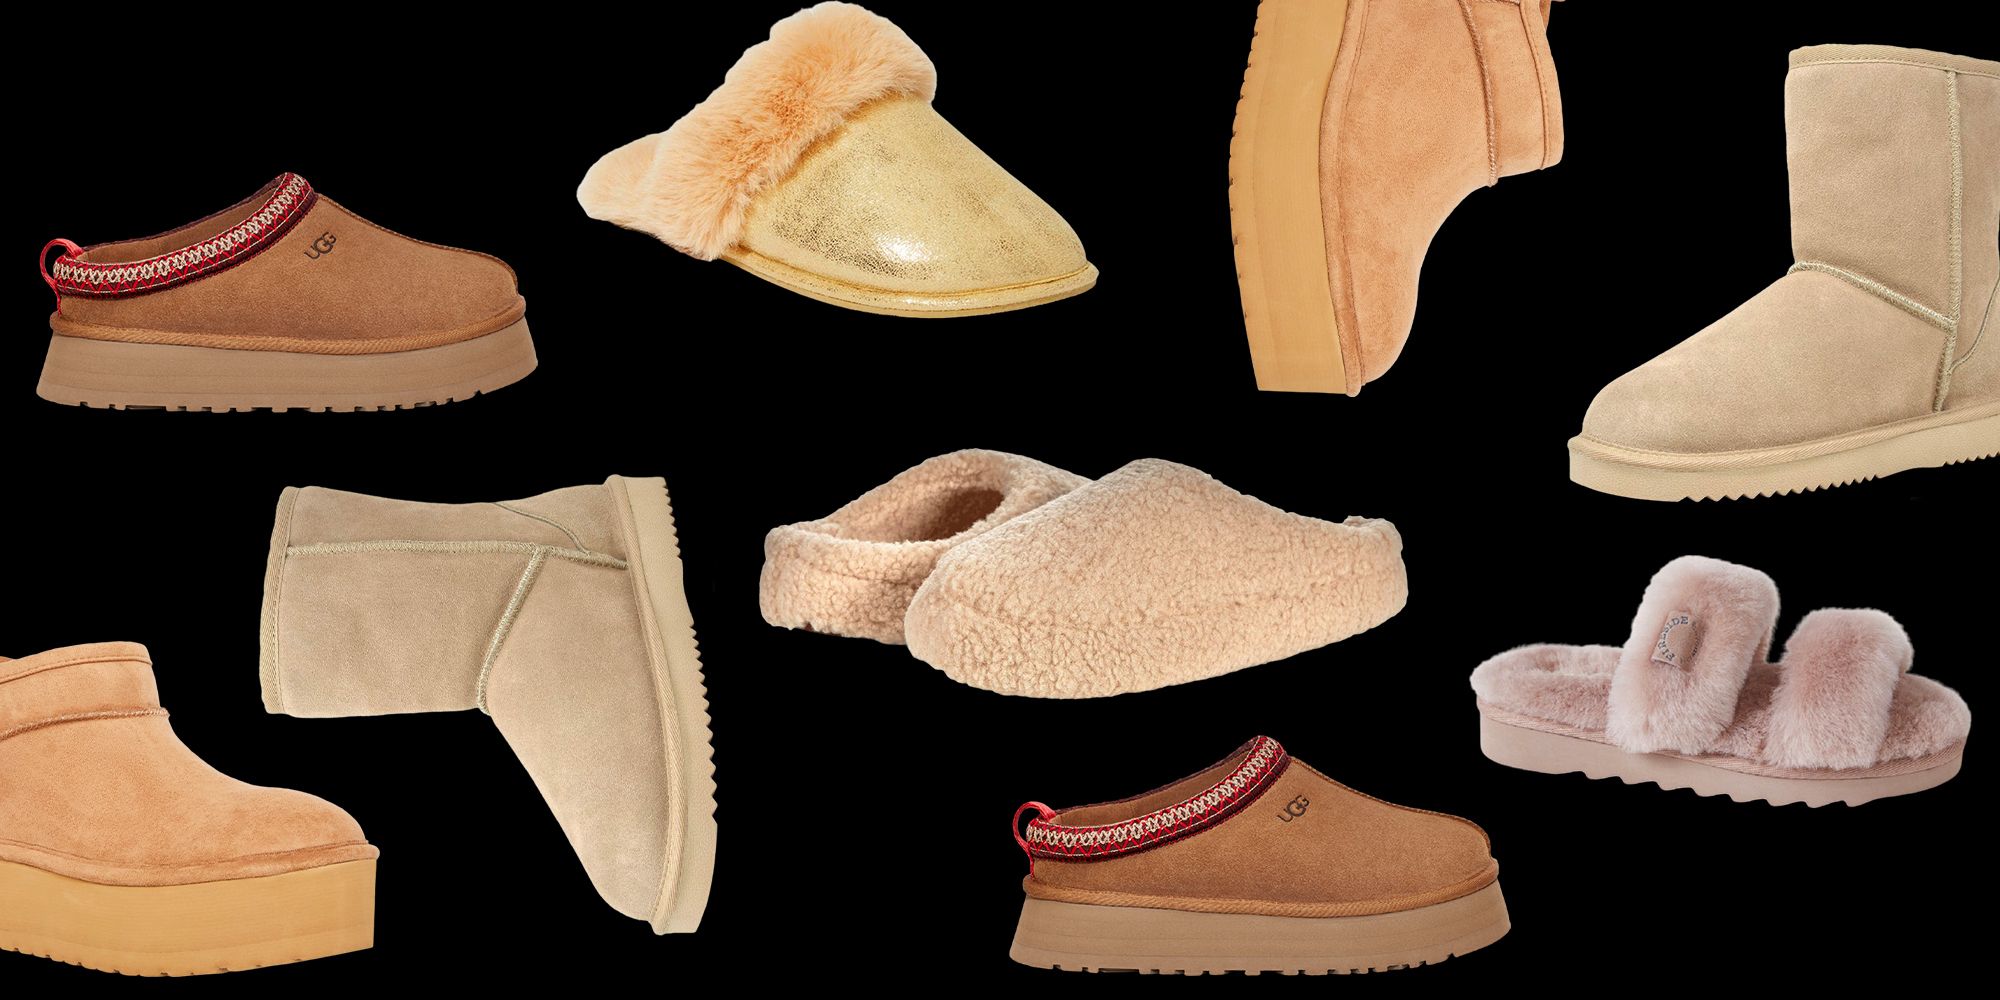 Styling UGG Tasman Slippers 6 Cozy Ways (Winter Outfit Ideas)